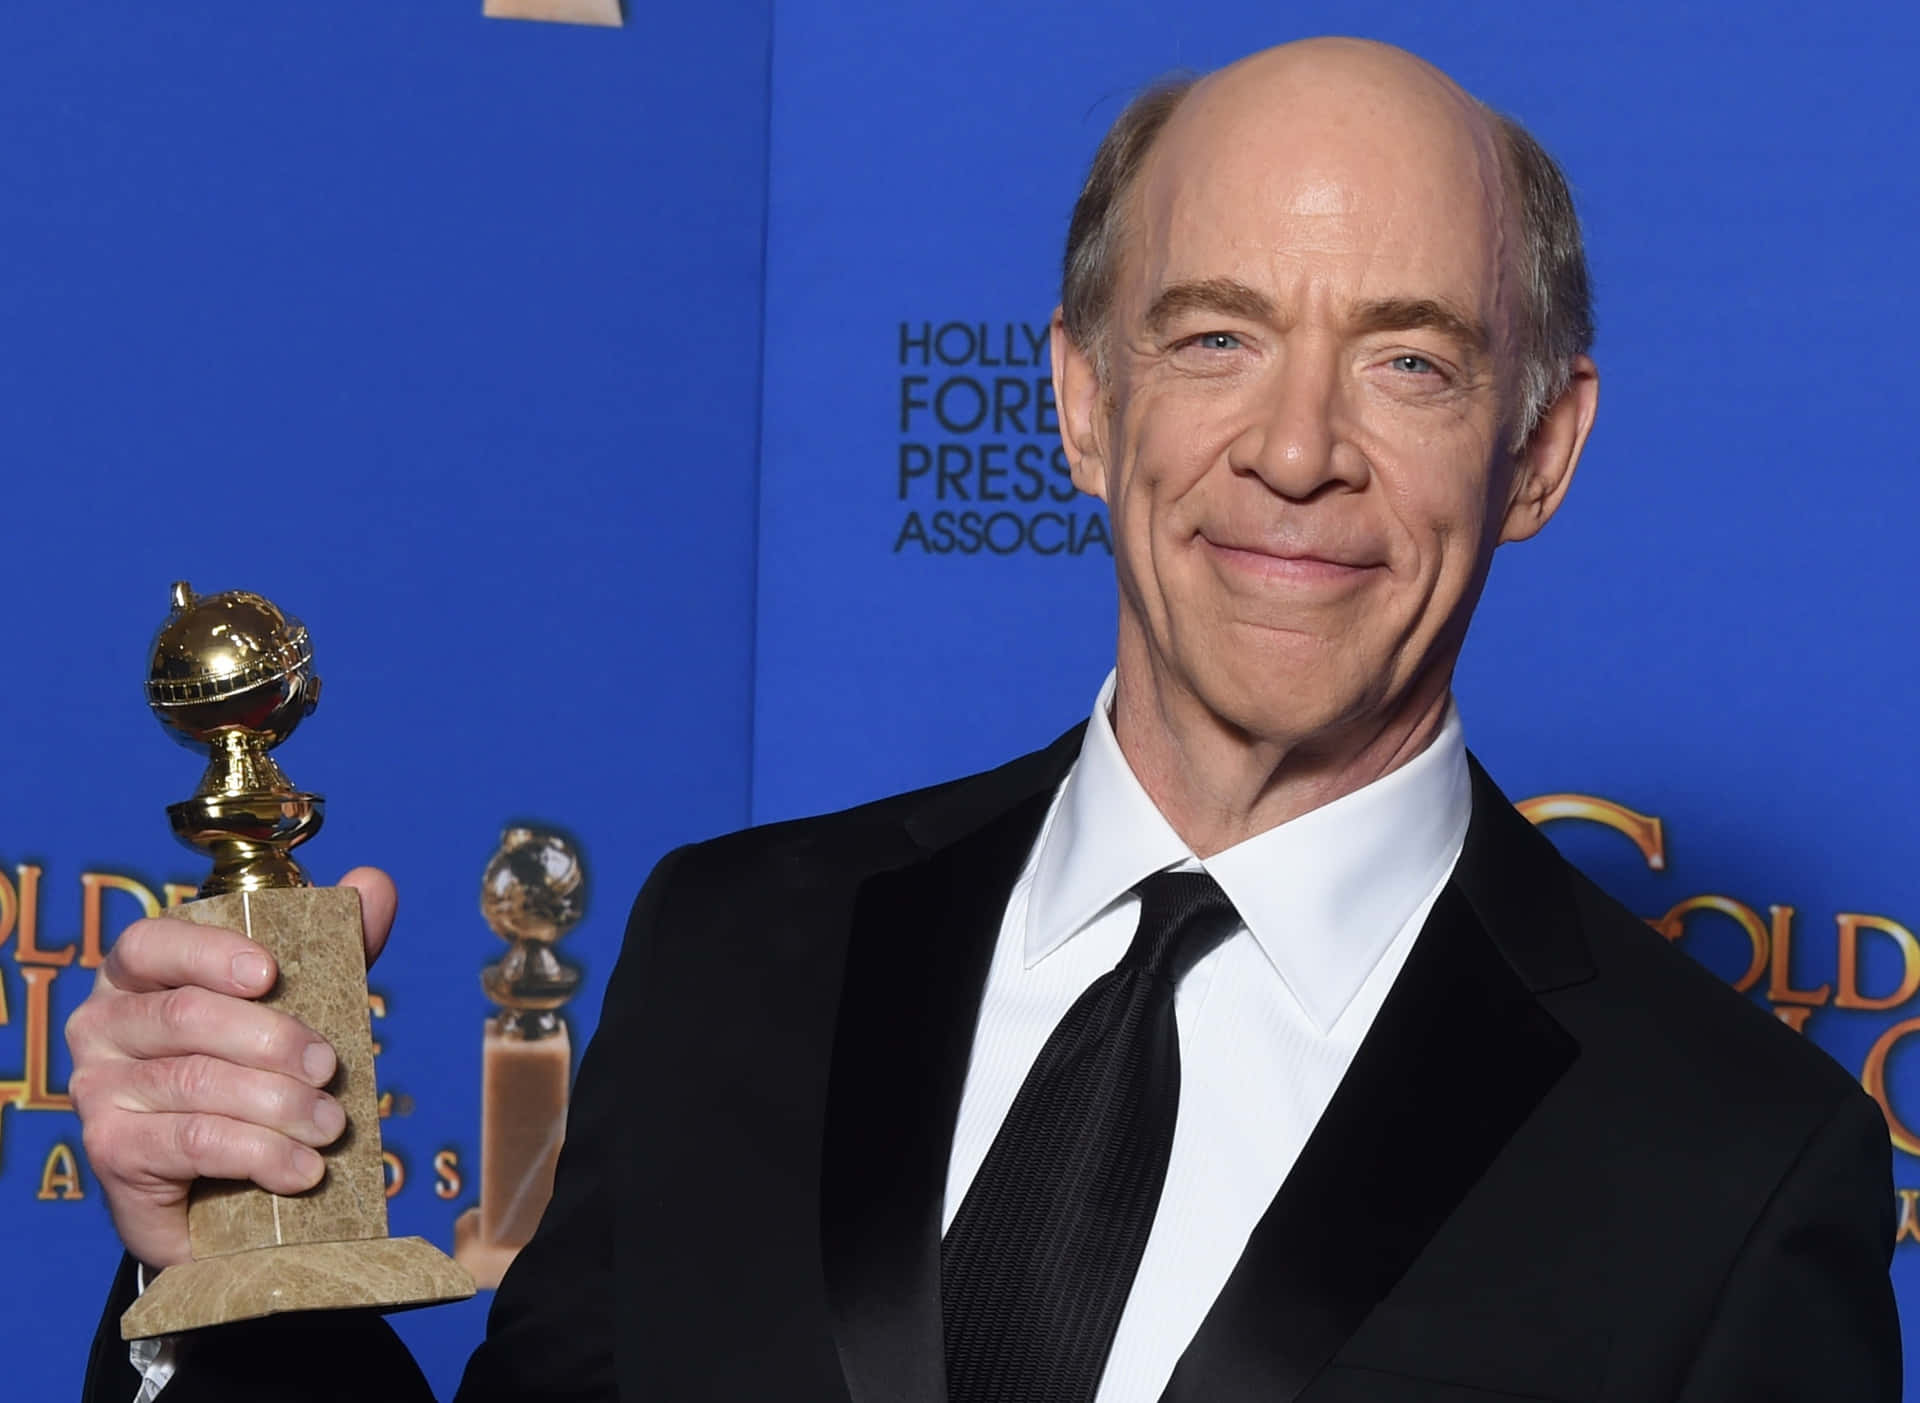 Jk. Simmons Is An American Actor Who Is Best Known For His Roles In Movies Such As 